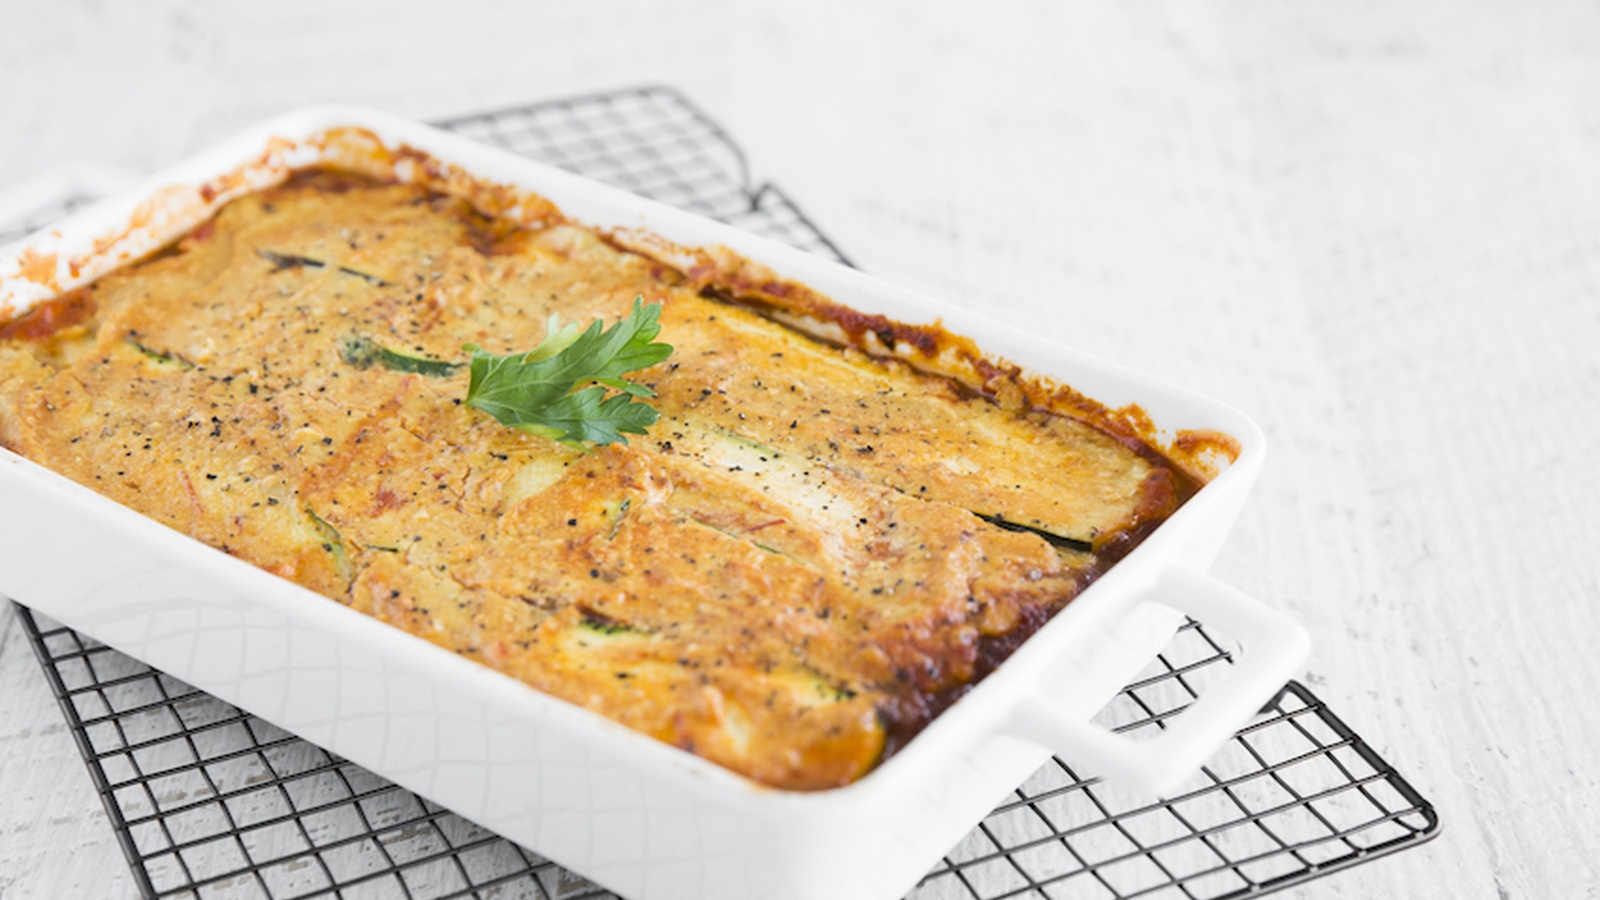 Zucchini Lasagne With Cashew Cheese Even Meat-Lovers Will Love (Dairy-Free, Gluten-Free Recipe)